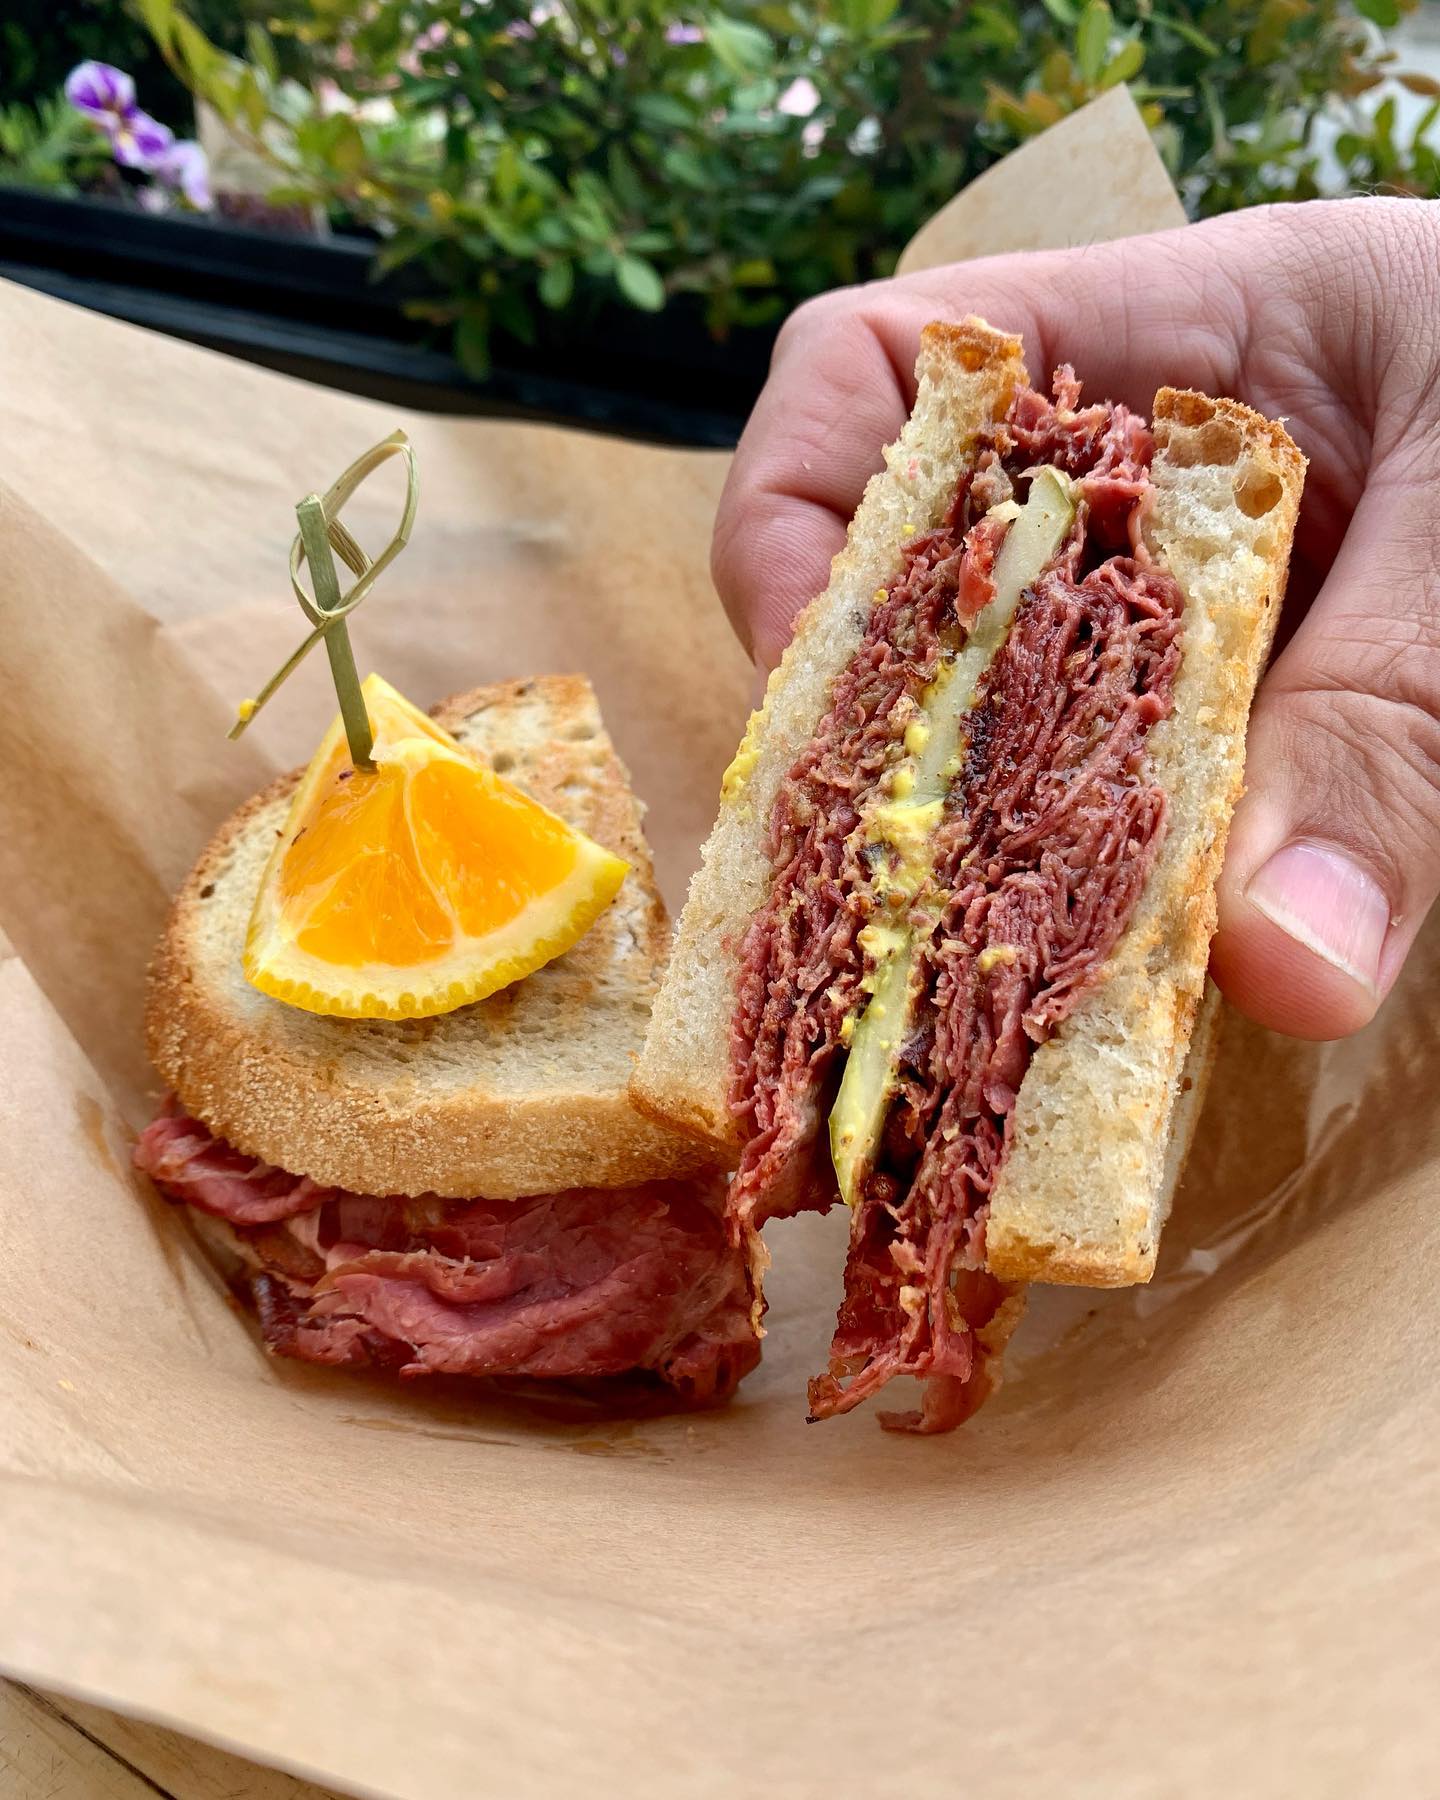 Very good Montreal smoked meat sandwich @labaguettecatering for lunch today in Revelstoke as we travel to the #5dadsgowild retreat.

Toasted rye bread with mustard and a slice of dill pickle held all the meat in place. Wonderful.
.
.
.
#revelstoke #getoutside #montrealsmokedmeat #sandwich #gearupgetout #ryebread